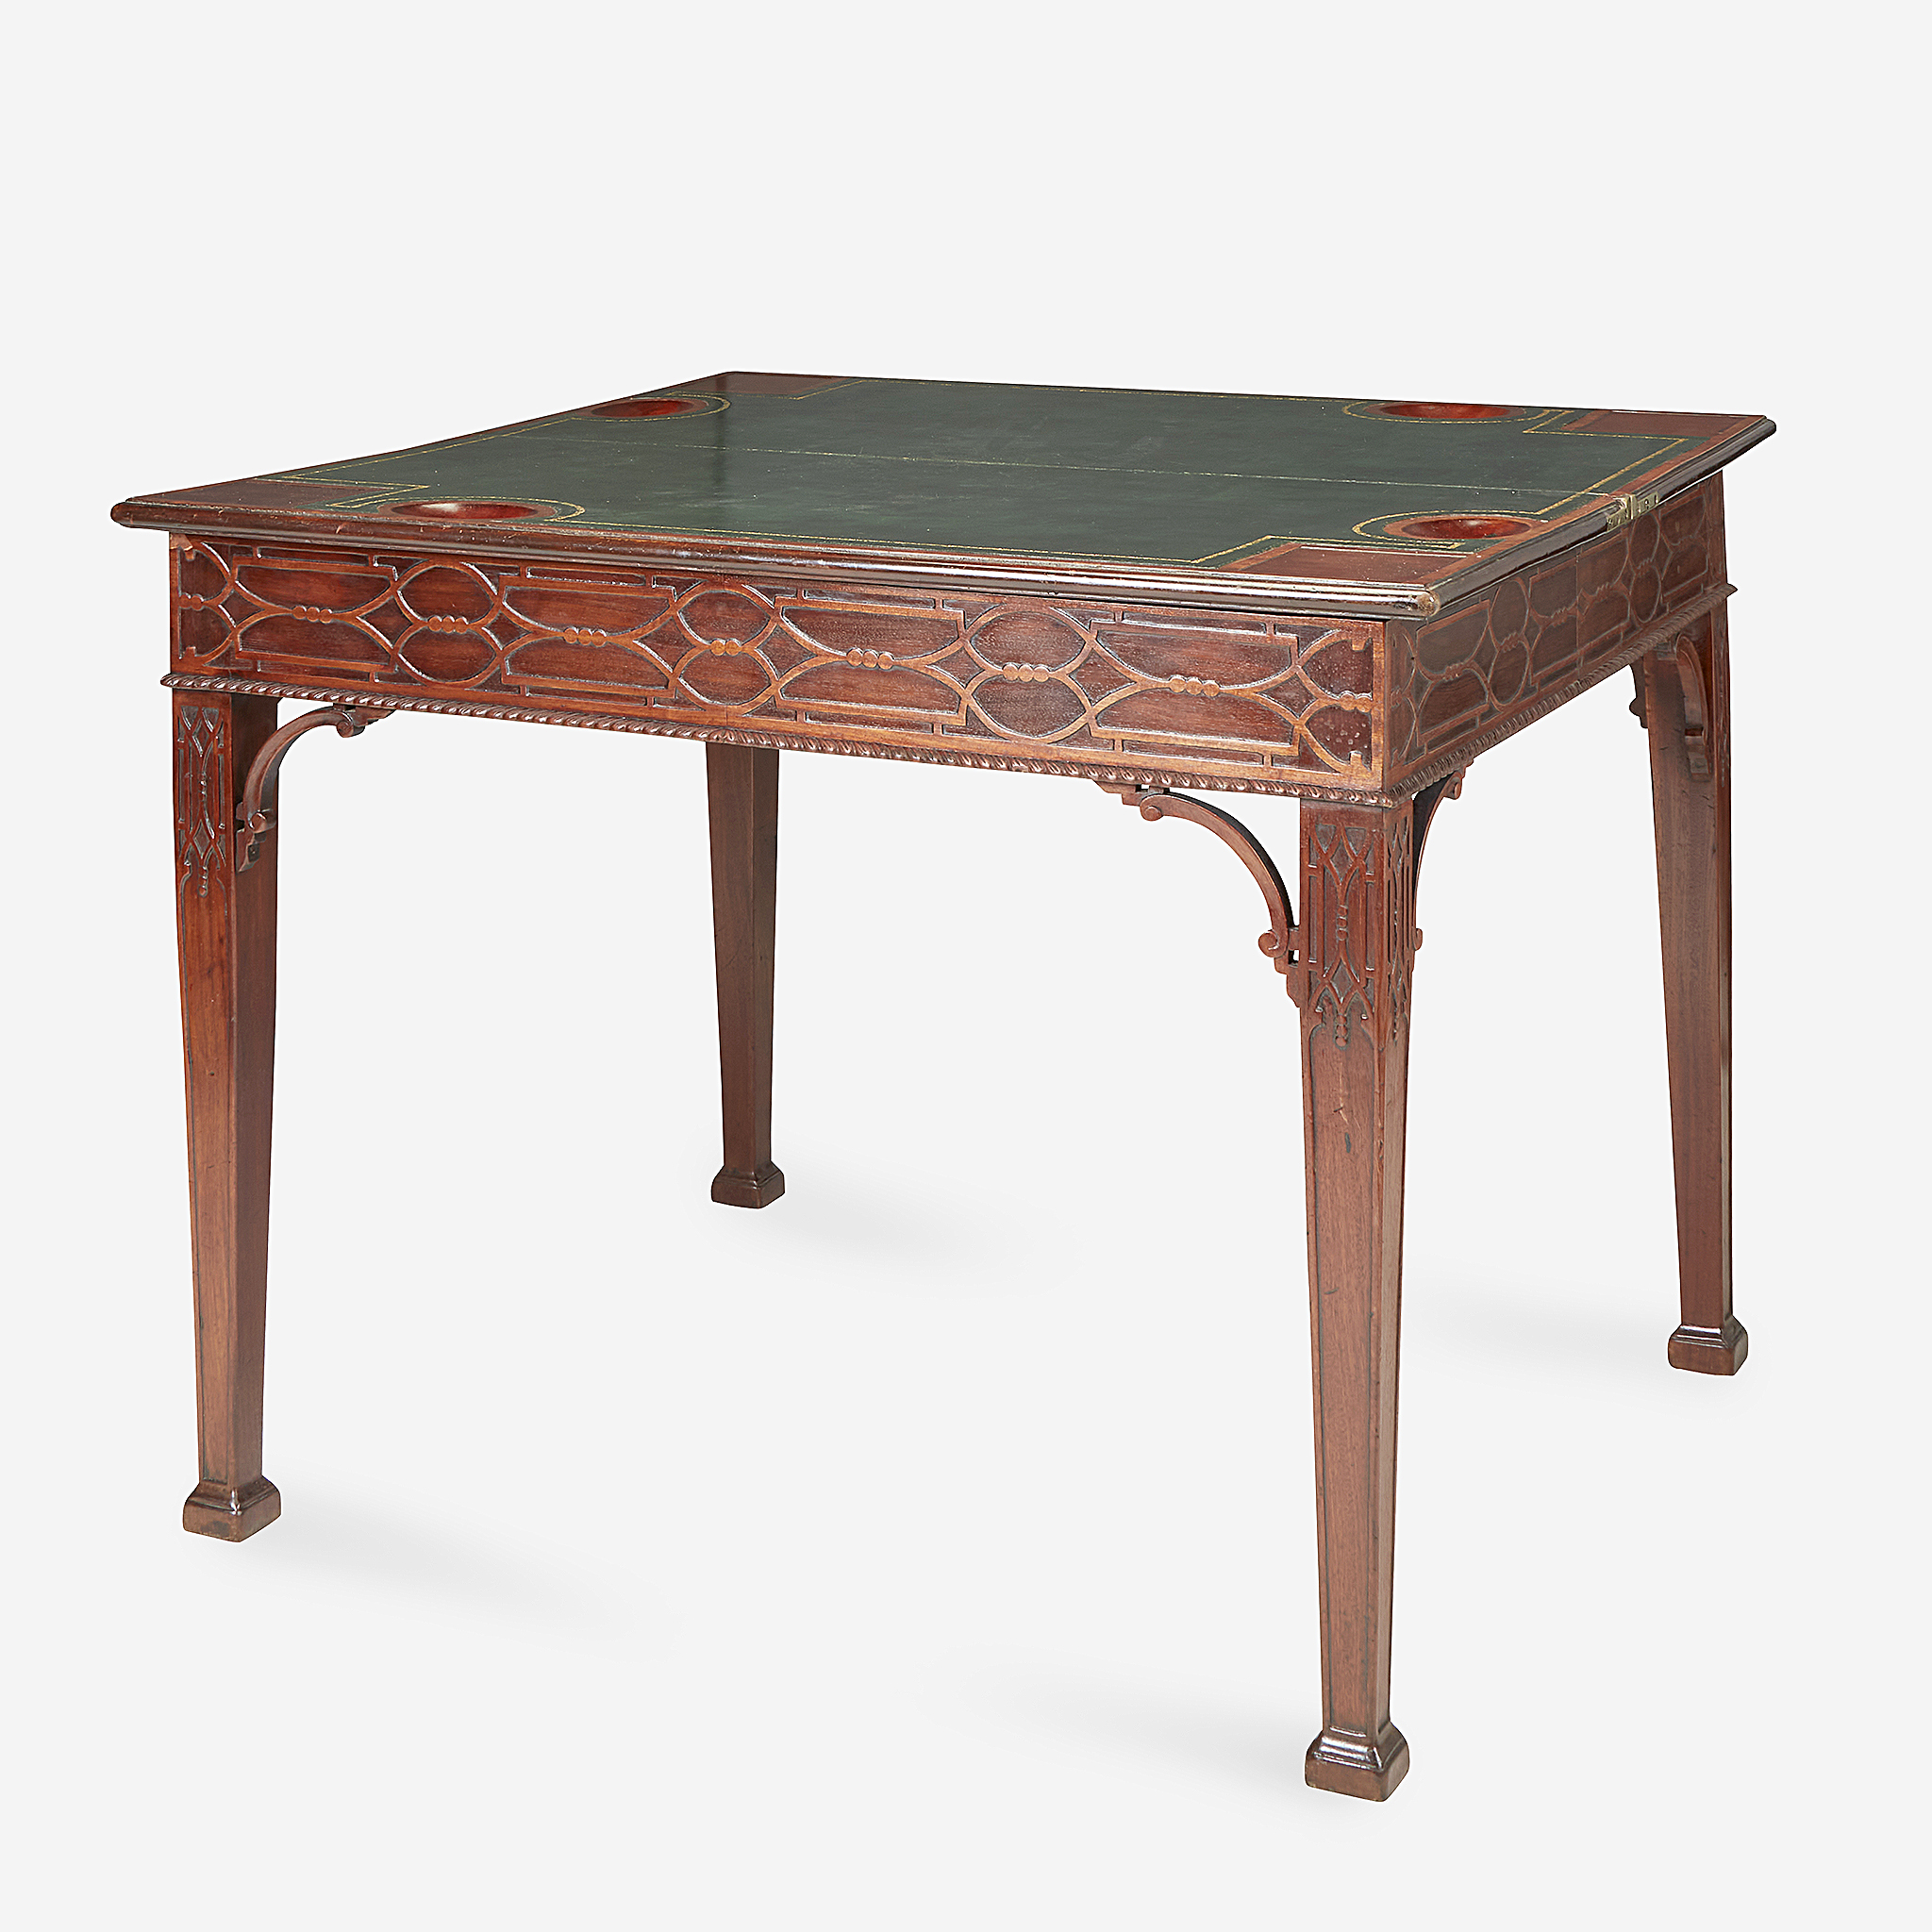 A George III Chinese Chippendale carved mahogany games table, Late 18th century - Image 2 of 2